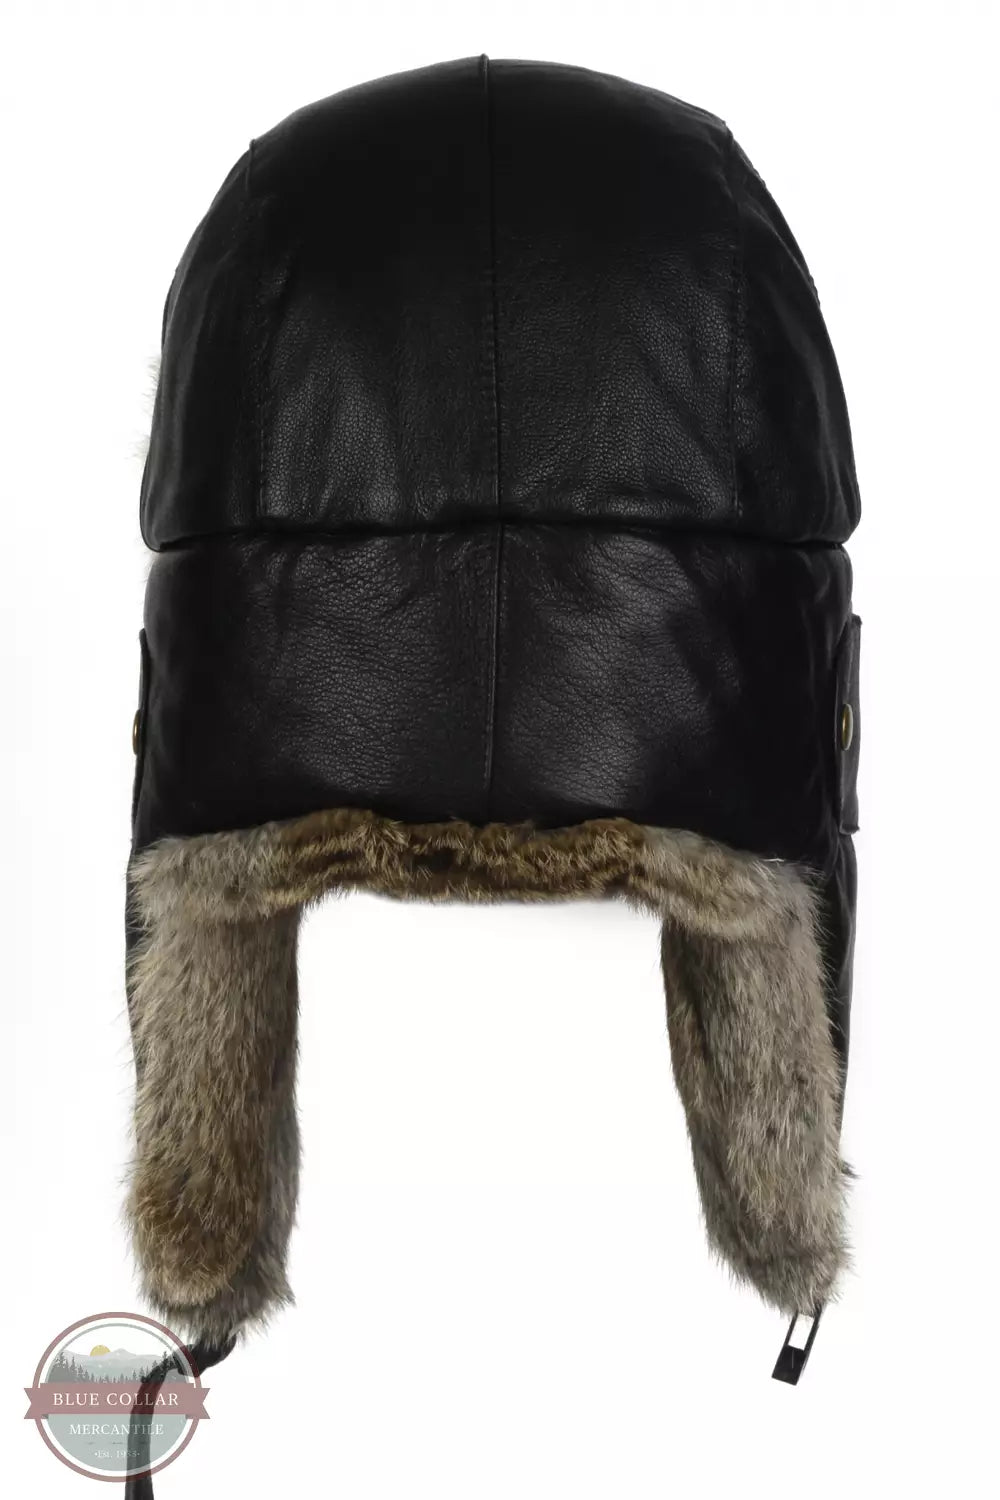 Mad Bomber 305LBLK Black Leather Bomber Hat with Rabbit Fur Back View